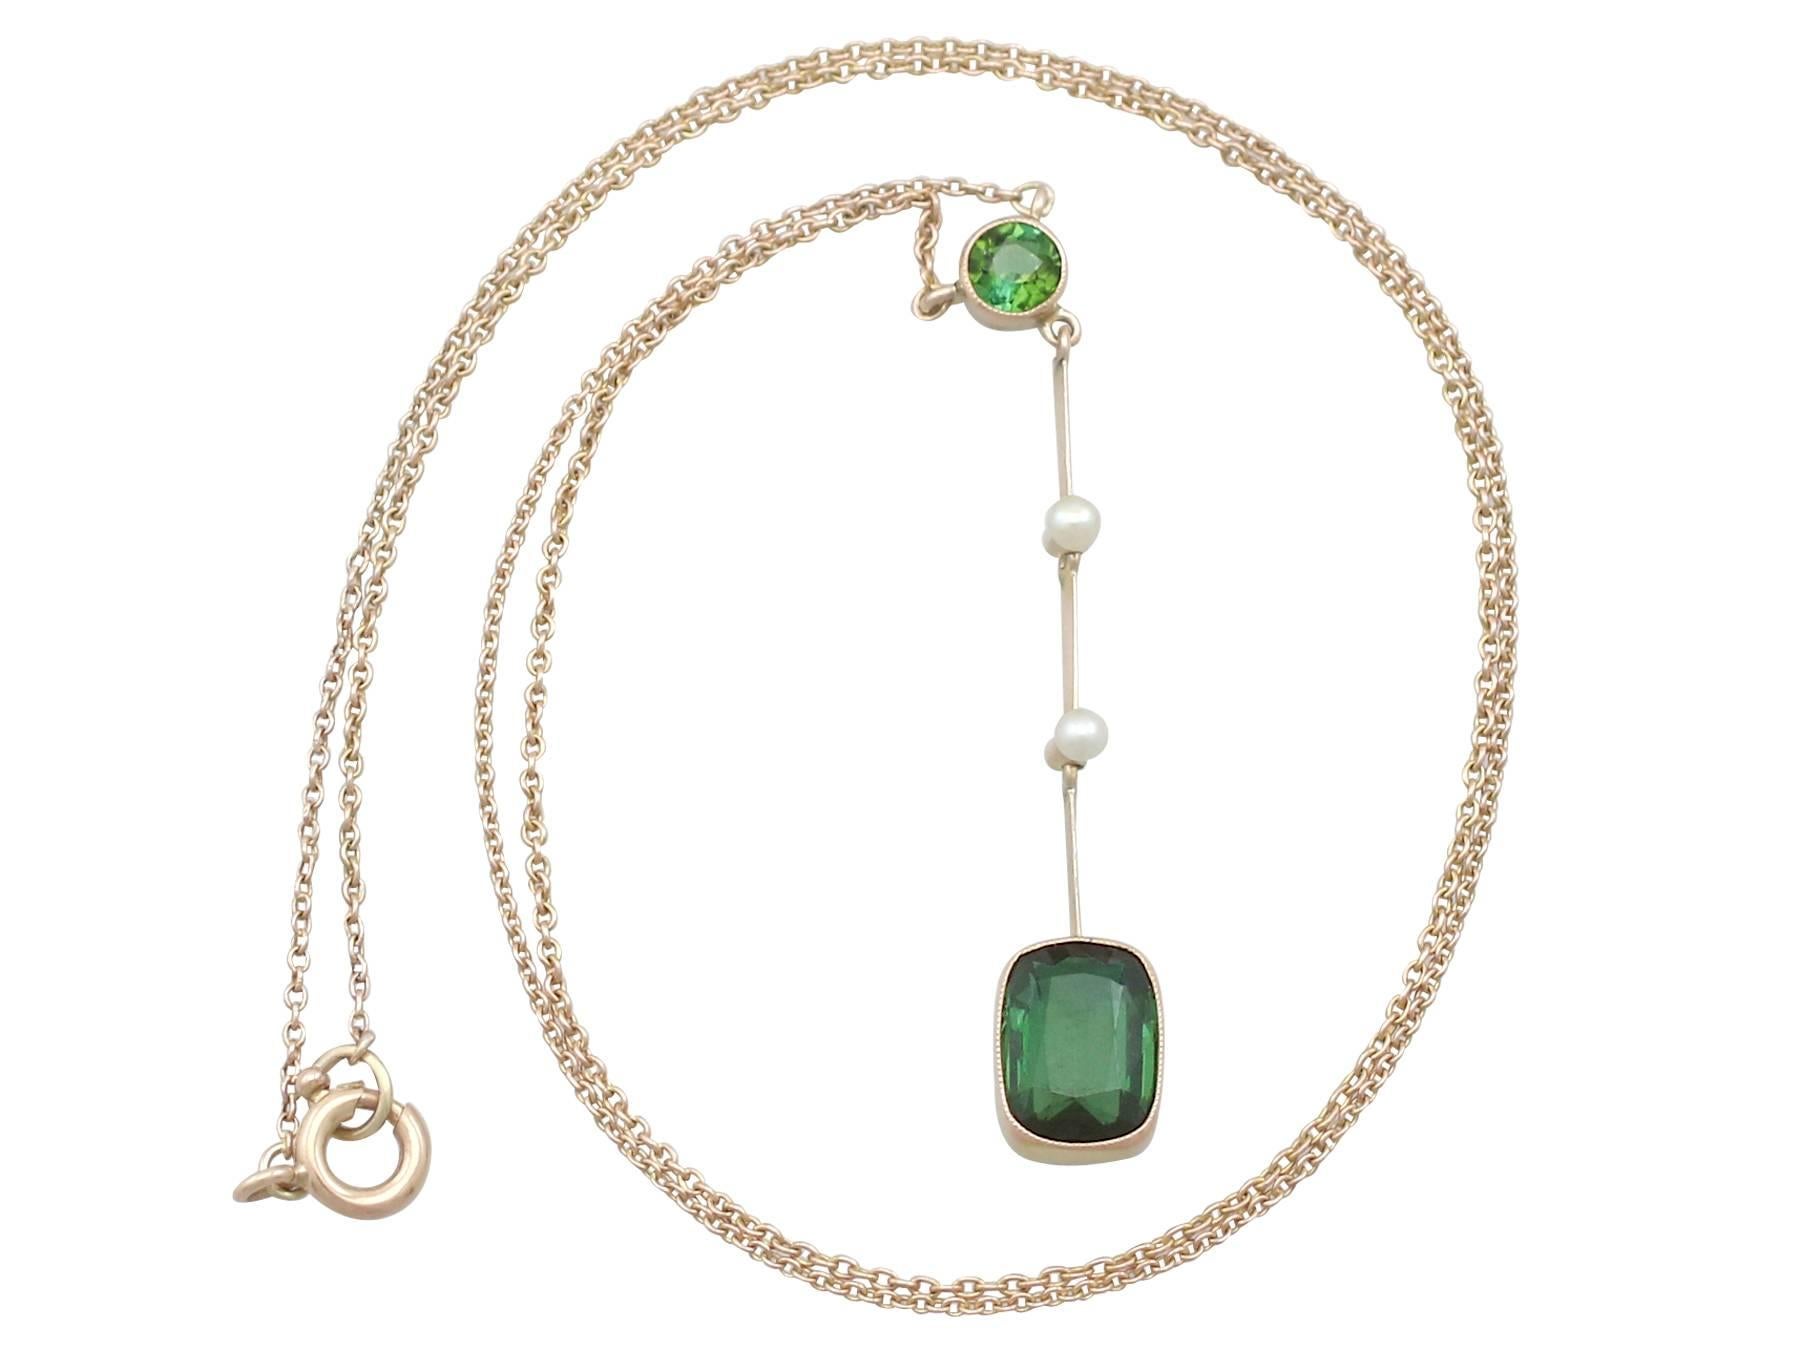 An impressive antique 1.86 carat tourmaline and seed pearl, 9 karat yellow gold necklace; part of our diverse antique jewelry and estate jewelry collections

This fine and impressive tourmaline pendant necklace has been crafted in 9k yellow